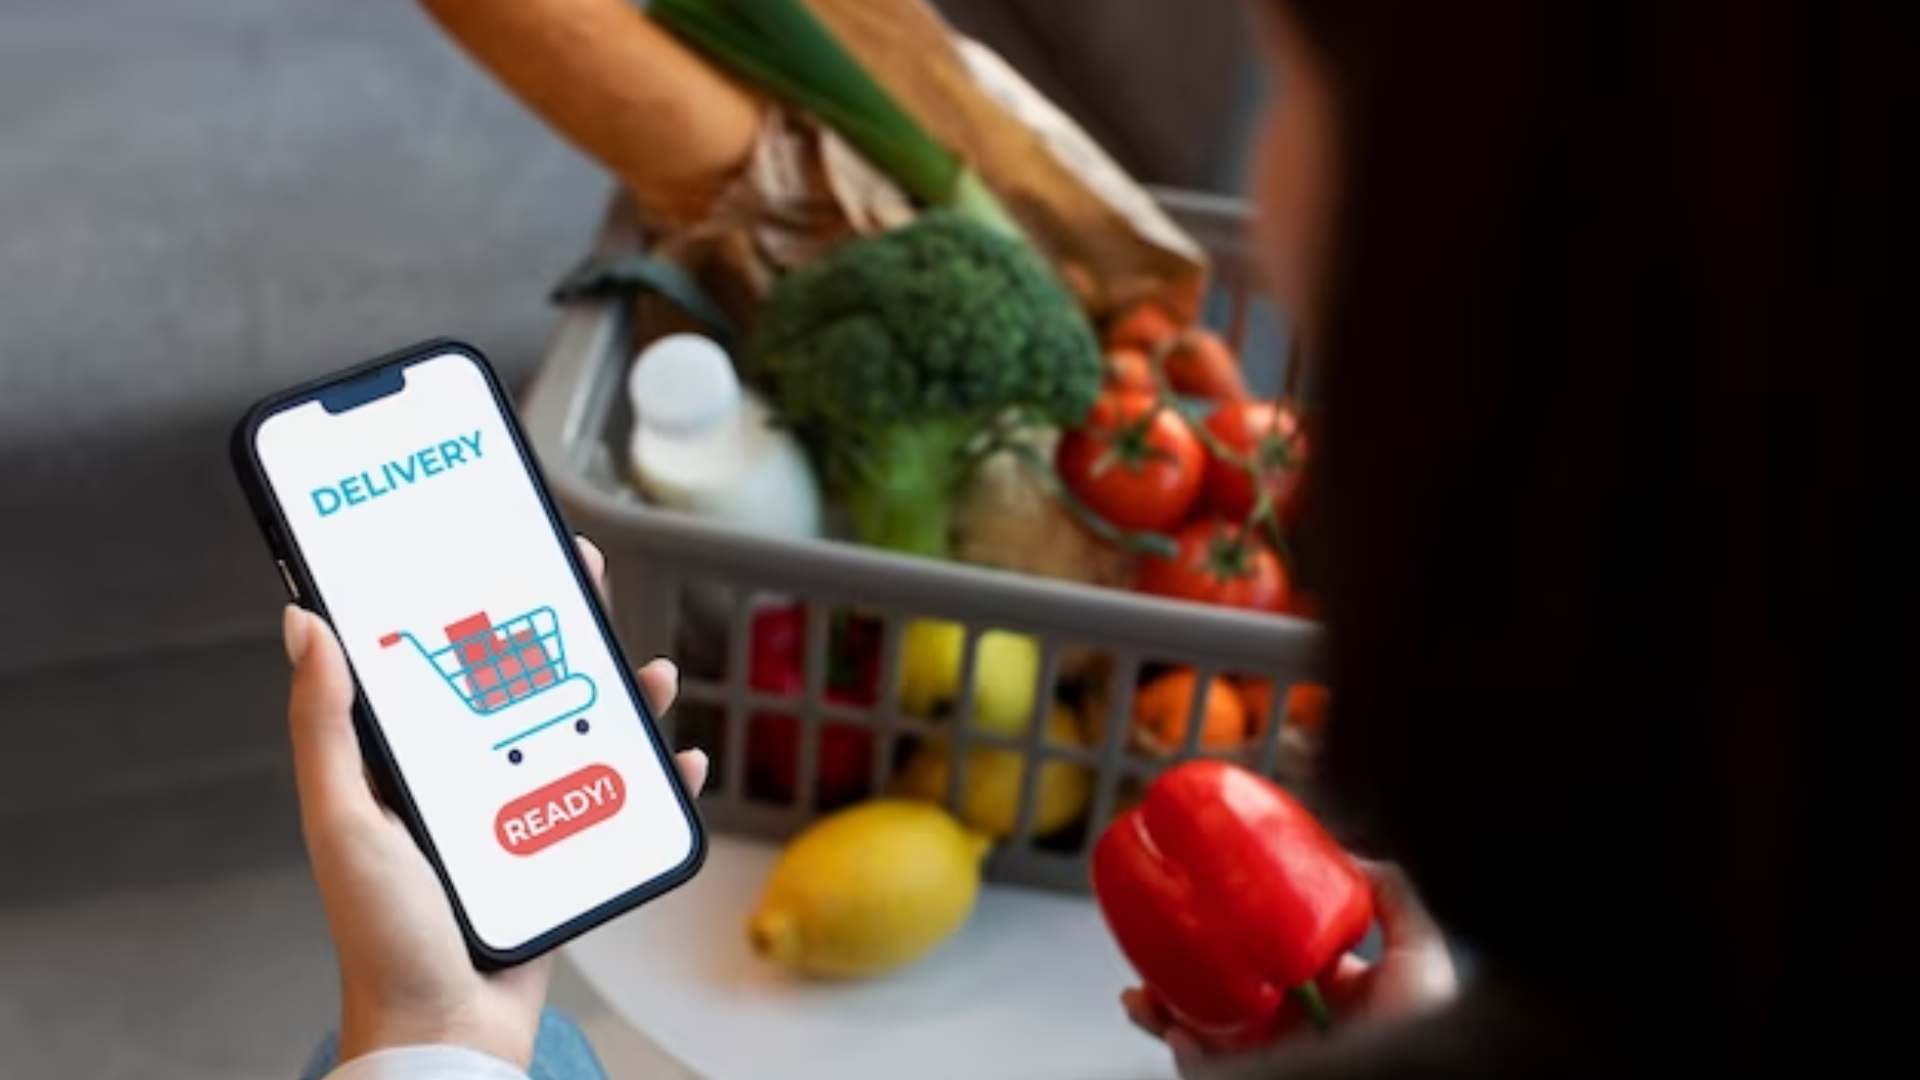 Grocery Delivery Services